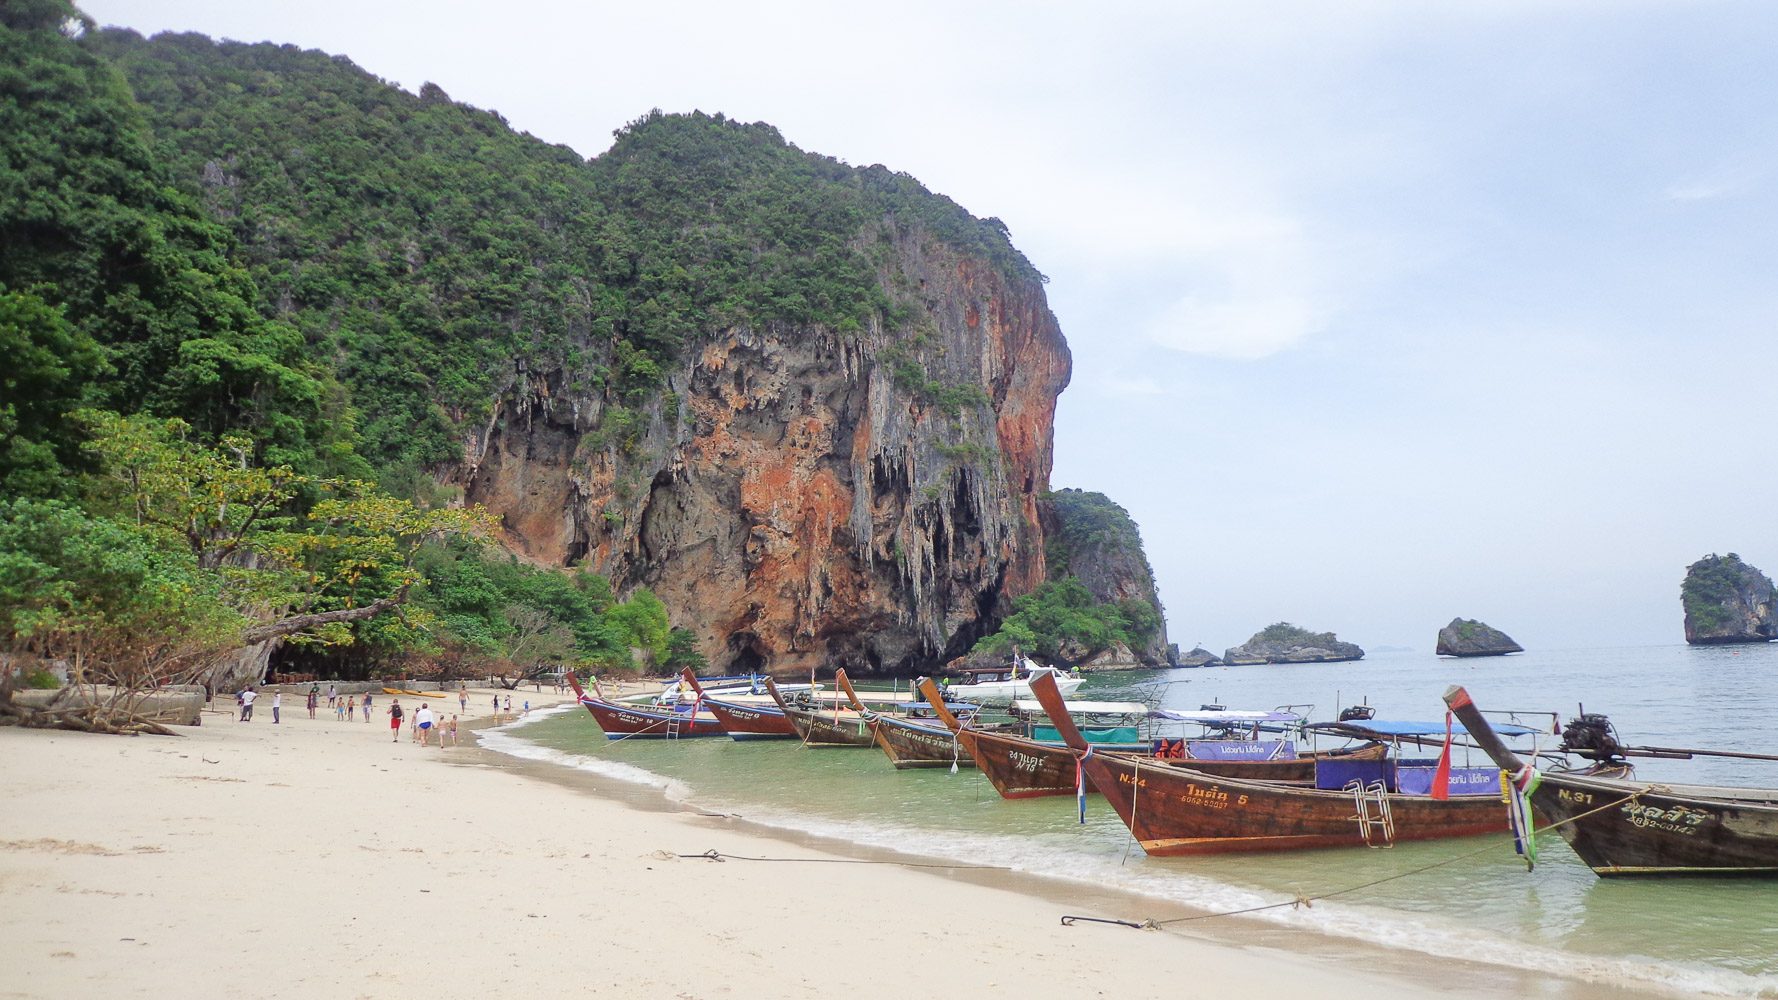 Railay Beach. Despite the crowds Railay maintains its natural charm. Swim in the waters and marvel at nature's wonder. 